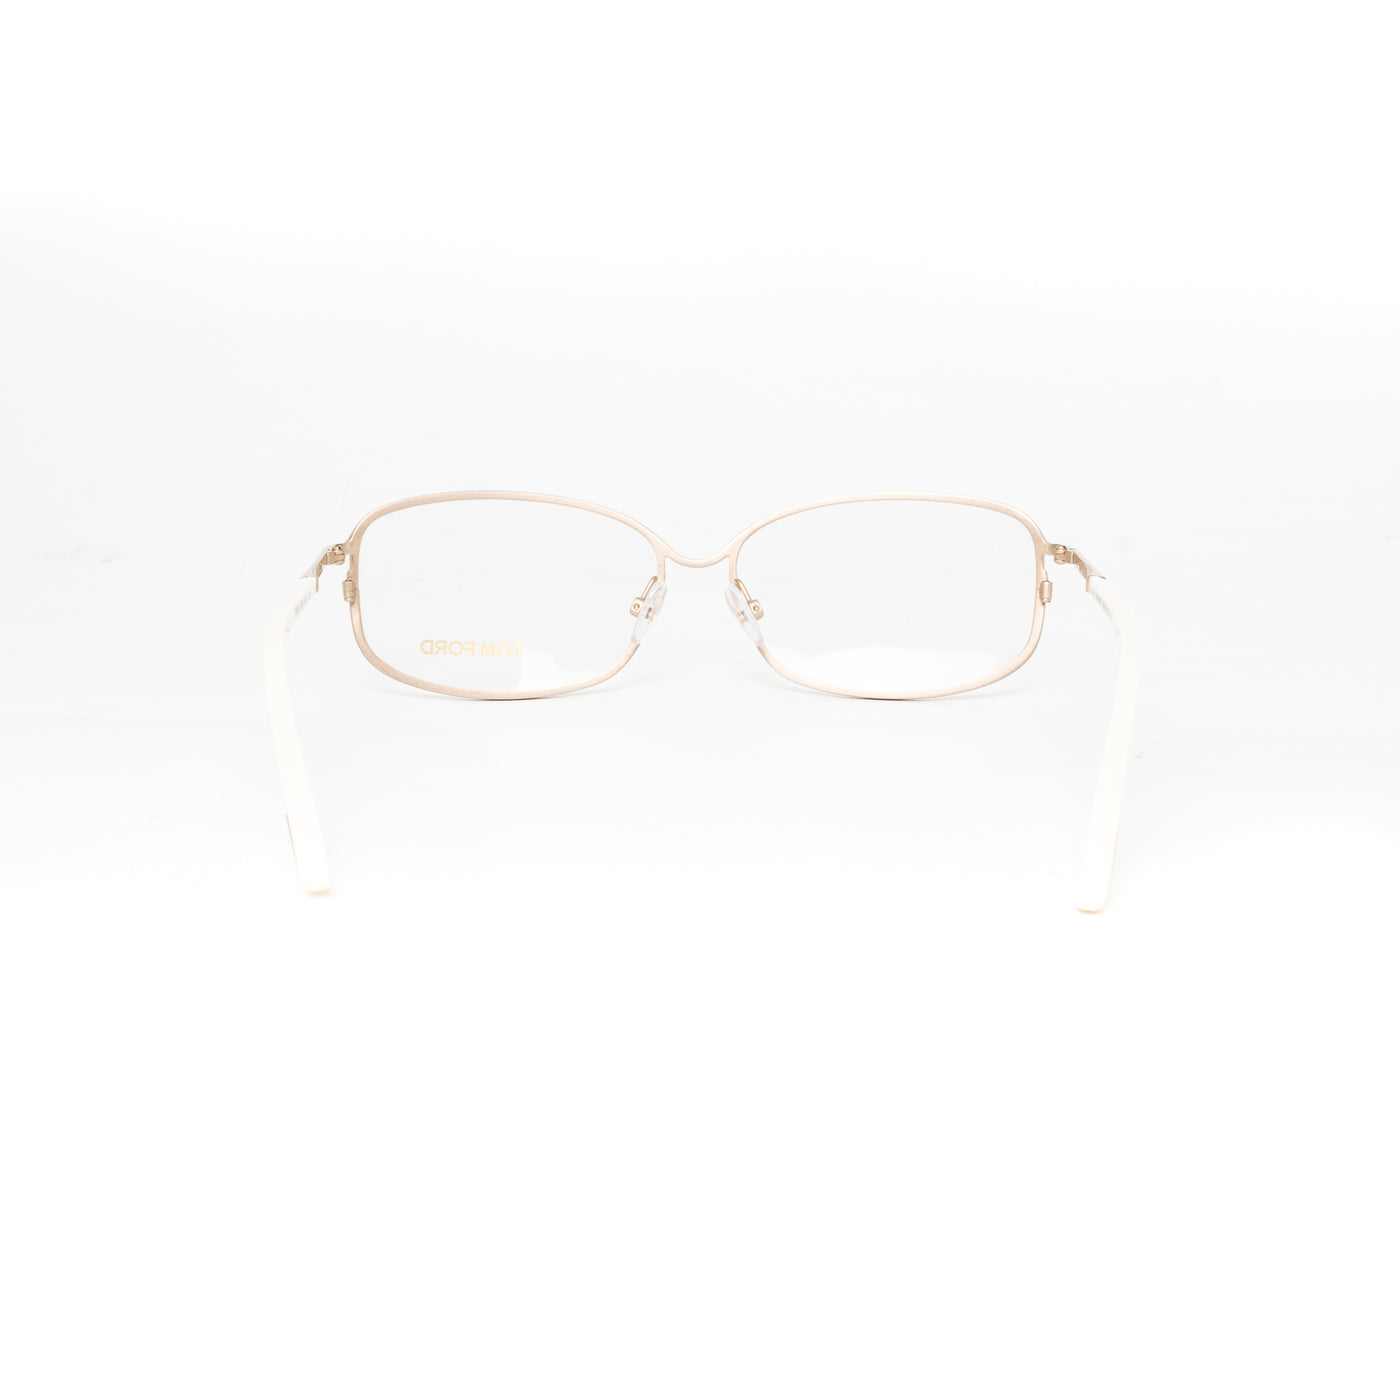 Tom Ford TF 5191/028 | Eyeglasses - Vision Express Optical Philippines